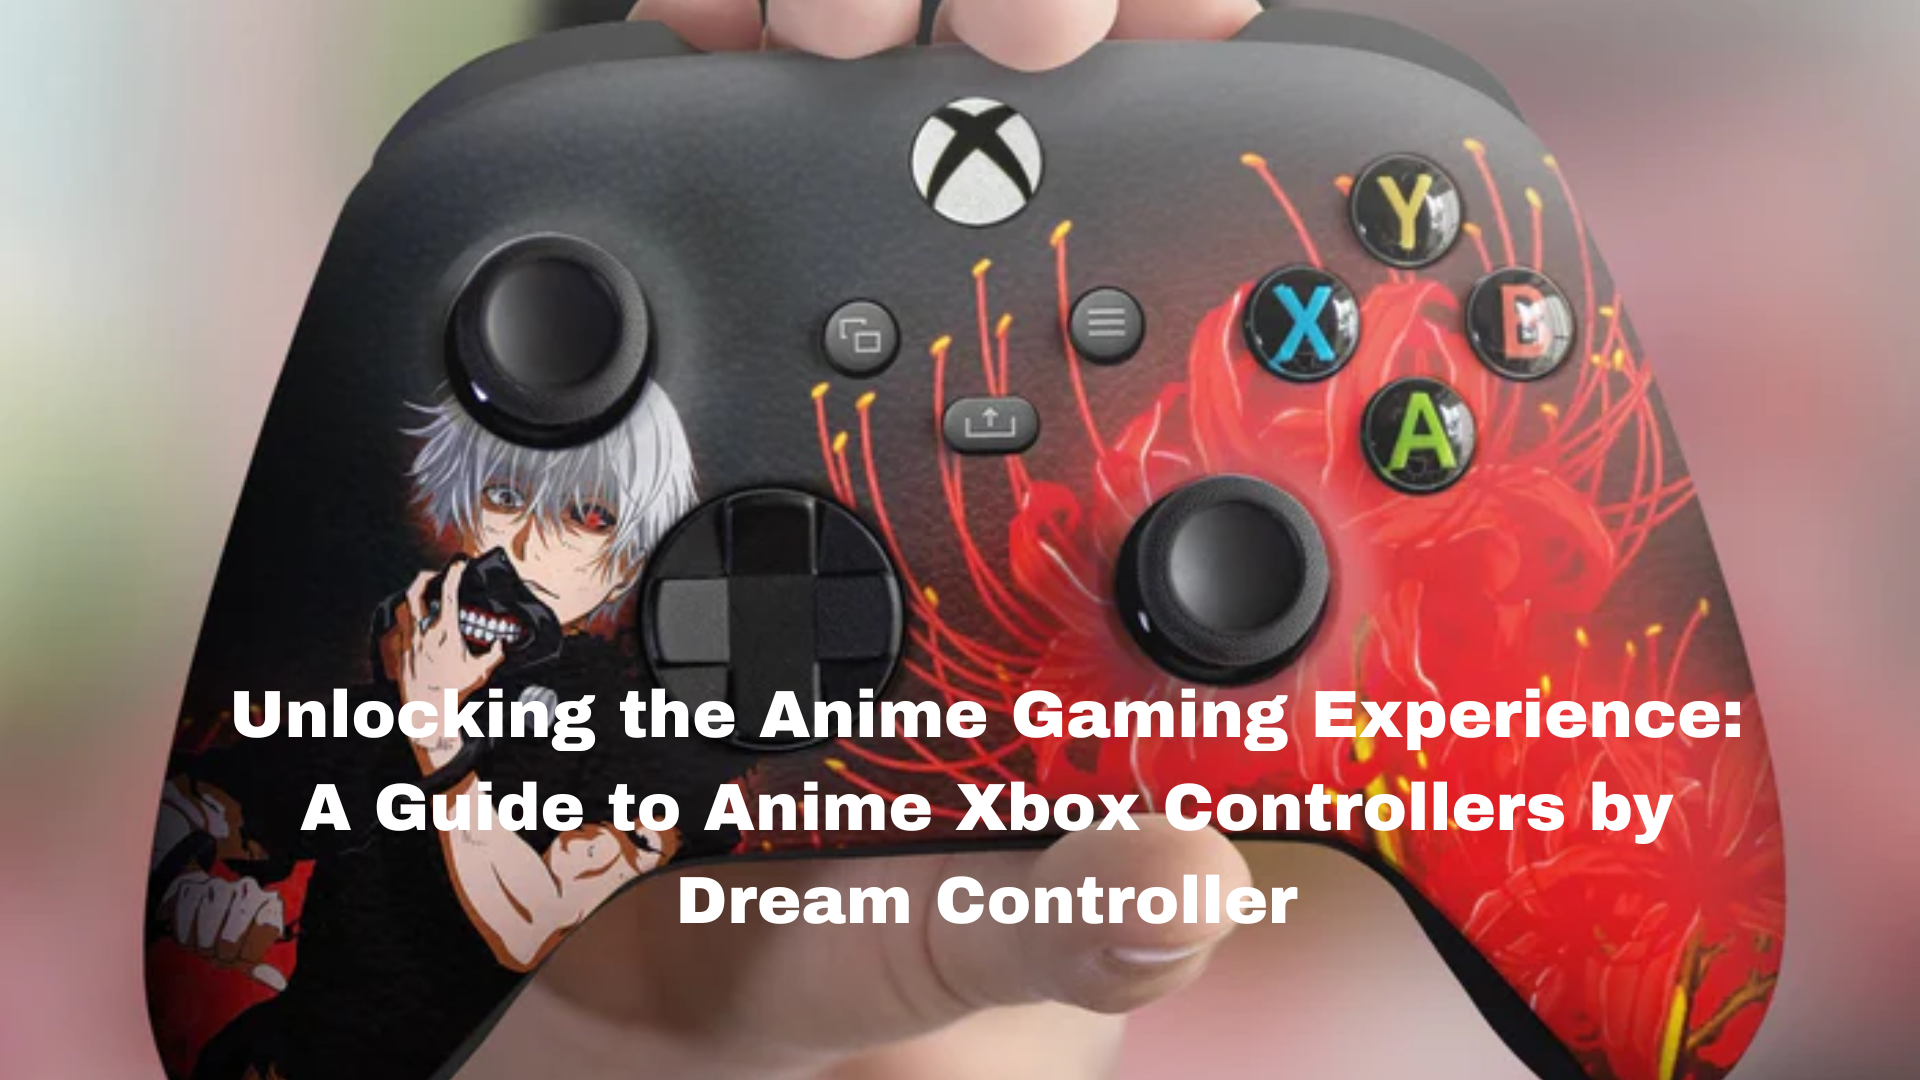 Unlocking the Anime Gaming Experience: A Guide to Anime Xbox Controllers by Dream Controller